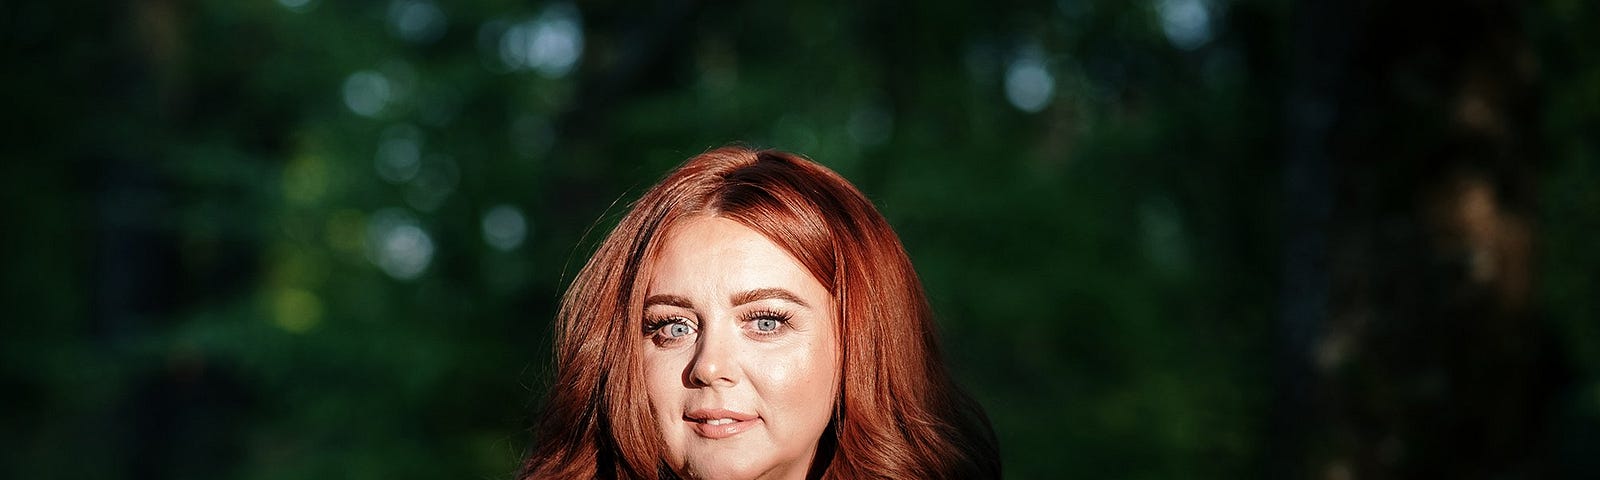 Close-up of attractive, vibrant woman in dusky pink blouse and long thick locks of red hair, standing in a shaded forest. Spotlight is on her face. By photographer Lisa McConnellogue. Ciara McCarron from Derry, Northern Ireland, is a Trauma-Informed Coach, Mentor & Therapist, Hypnotherapist and Founder of Redesign Your Vibe.